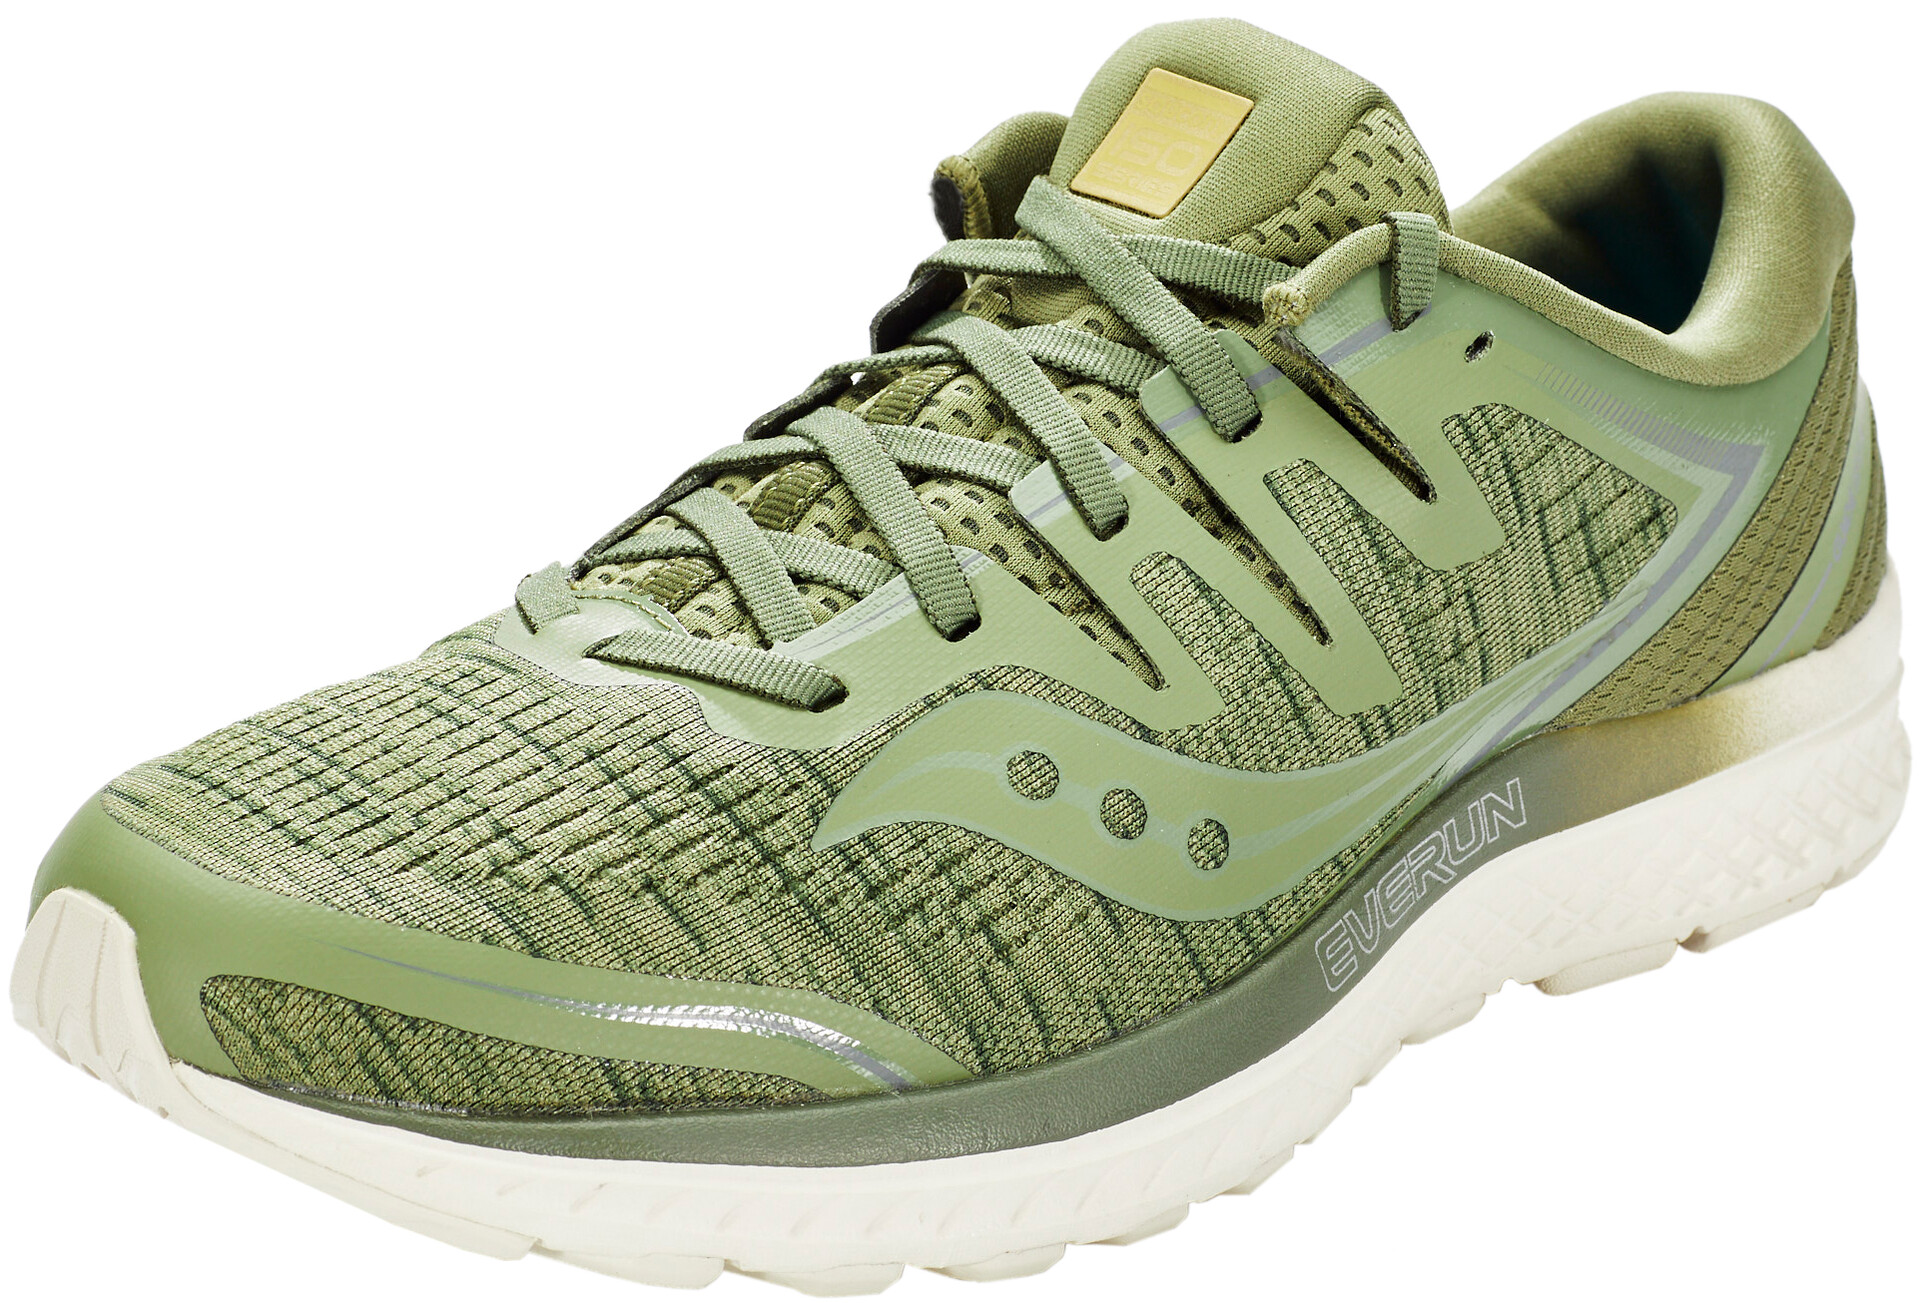 saucony Guide ISO 2 Shoes Men olive shade at bikester.co.uk